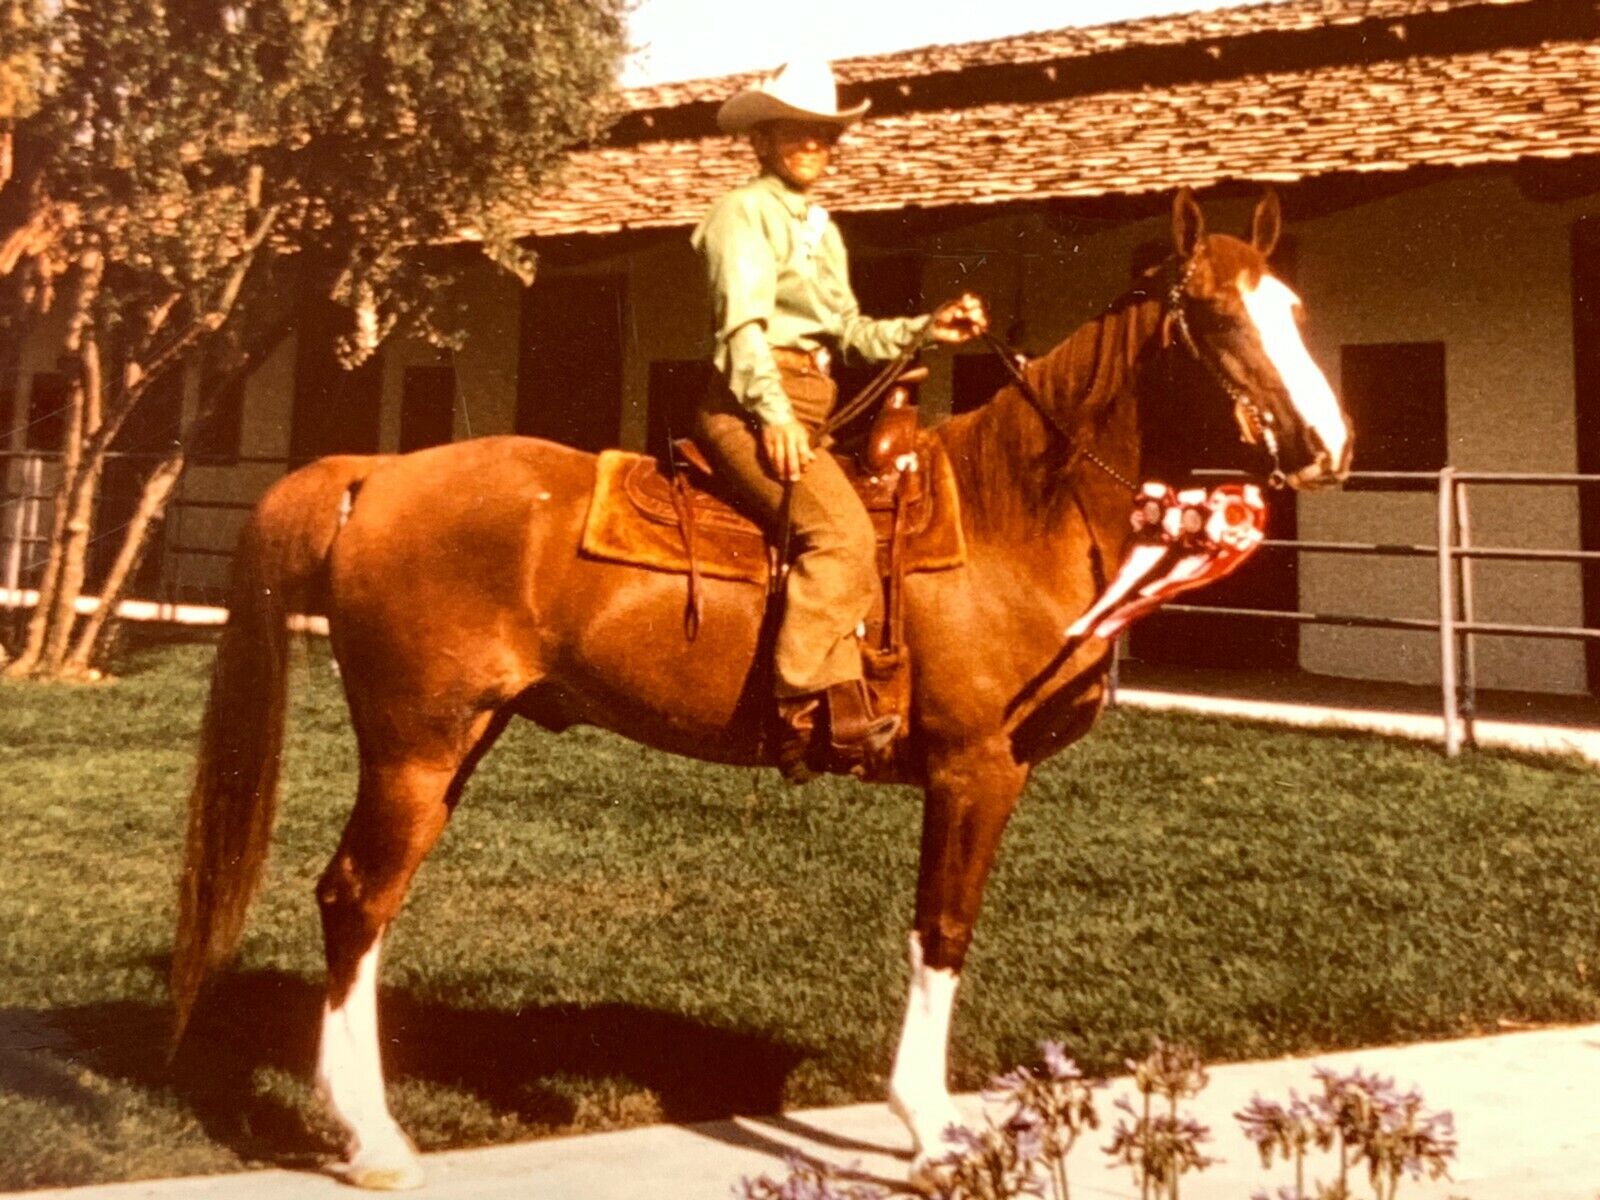 AvH) Found Photo Photograph 1973 Man On Handsome Horse BUSTER